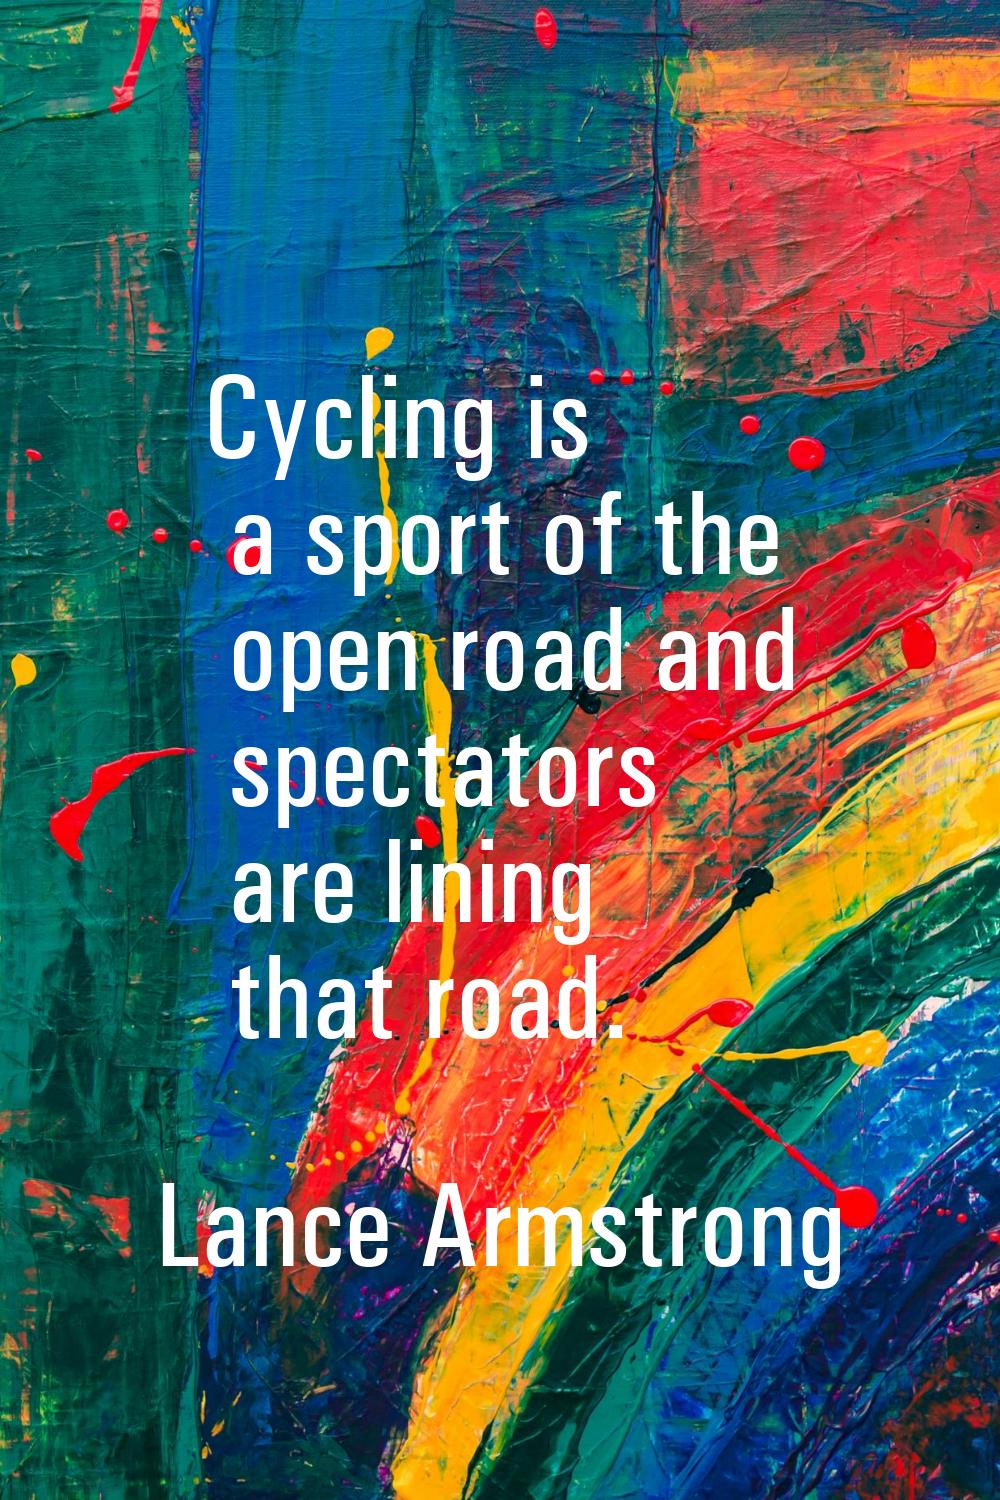 Cycling is a sport of the open road and spectators are lining that road.